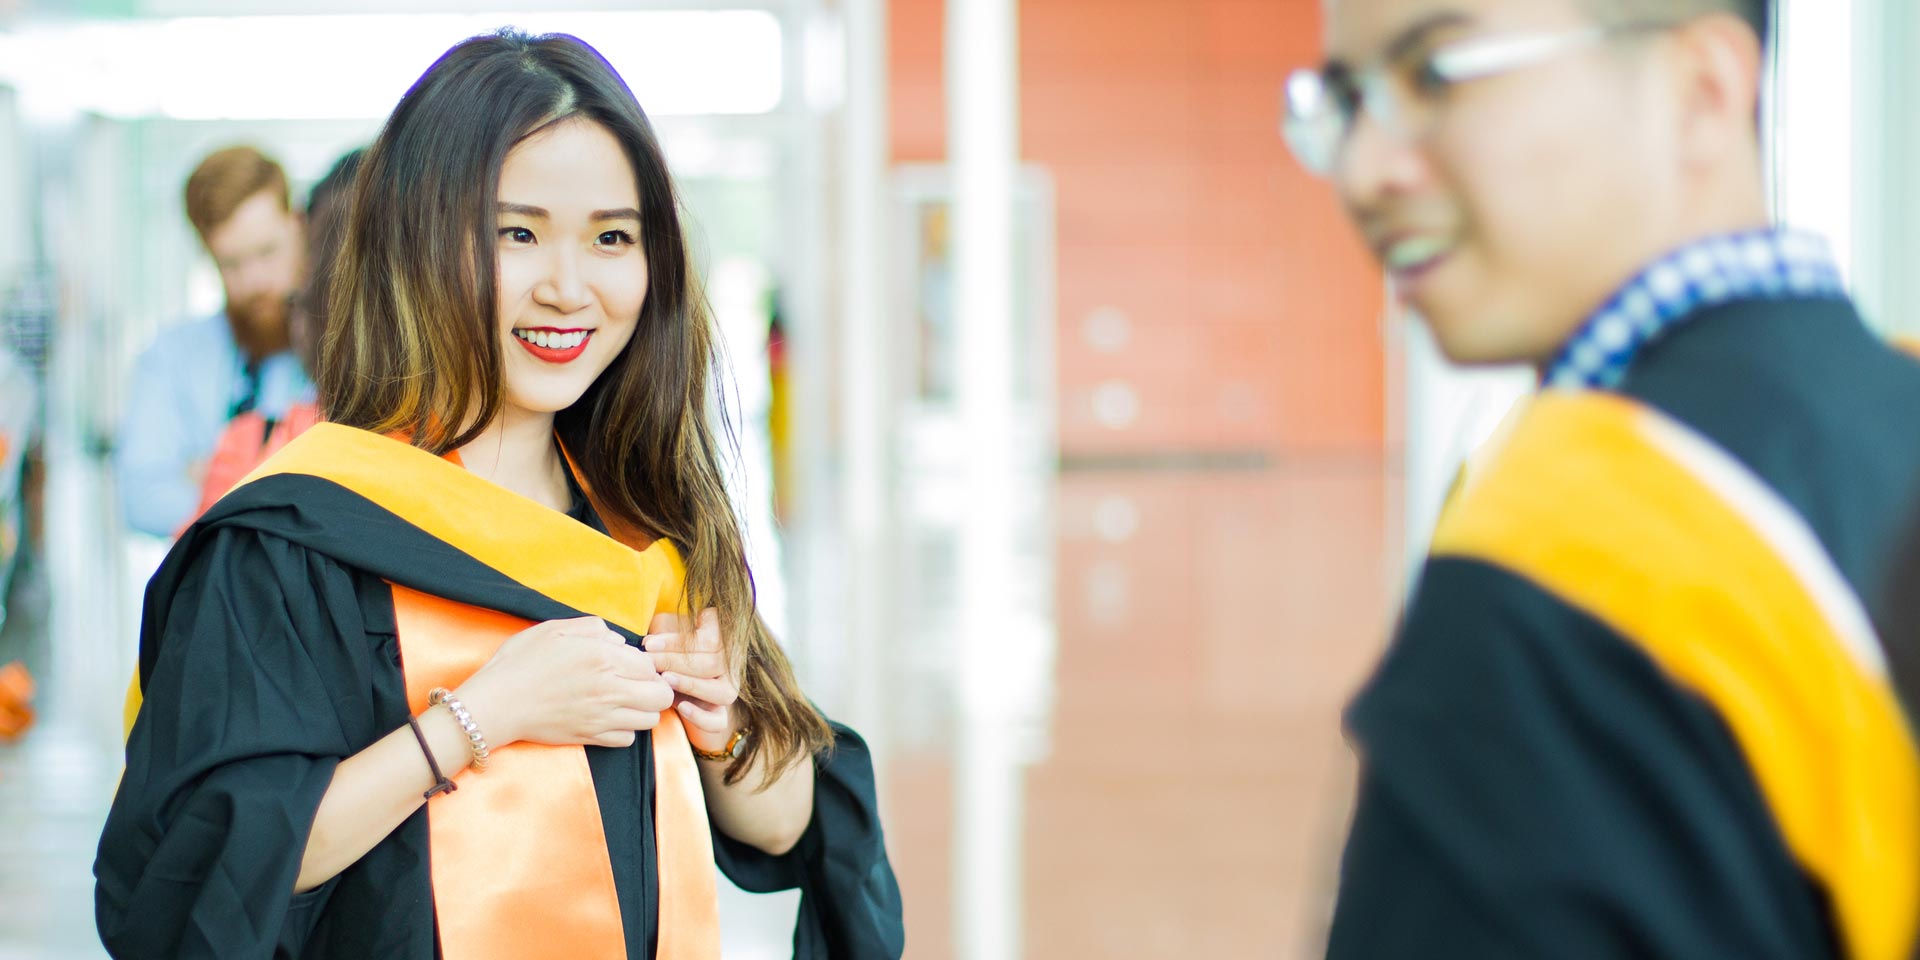 Nai-Jui Kuo prepares her robes and stoles before she graduates with master’s degrees in business analytics from the Naveen Jindal School of Management.